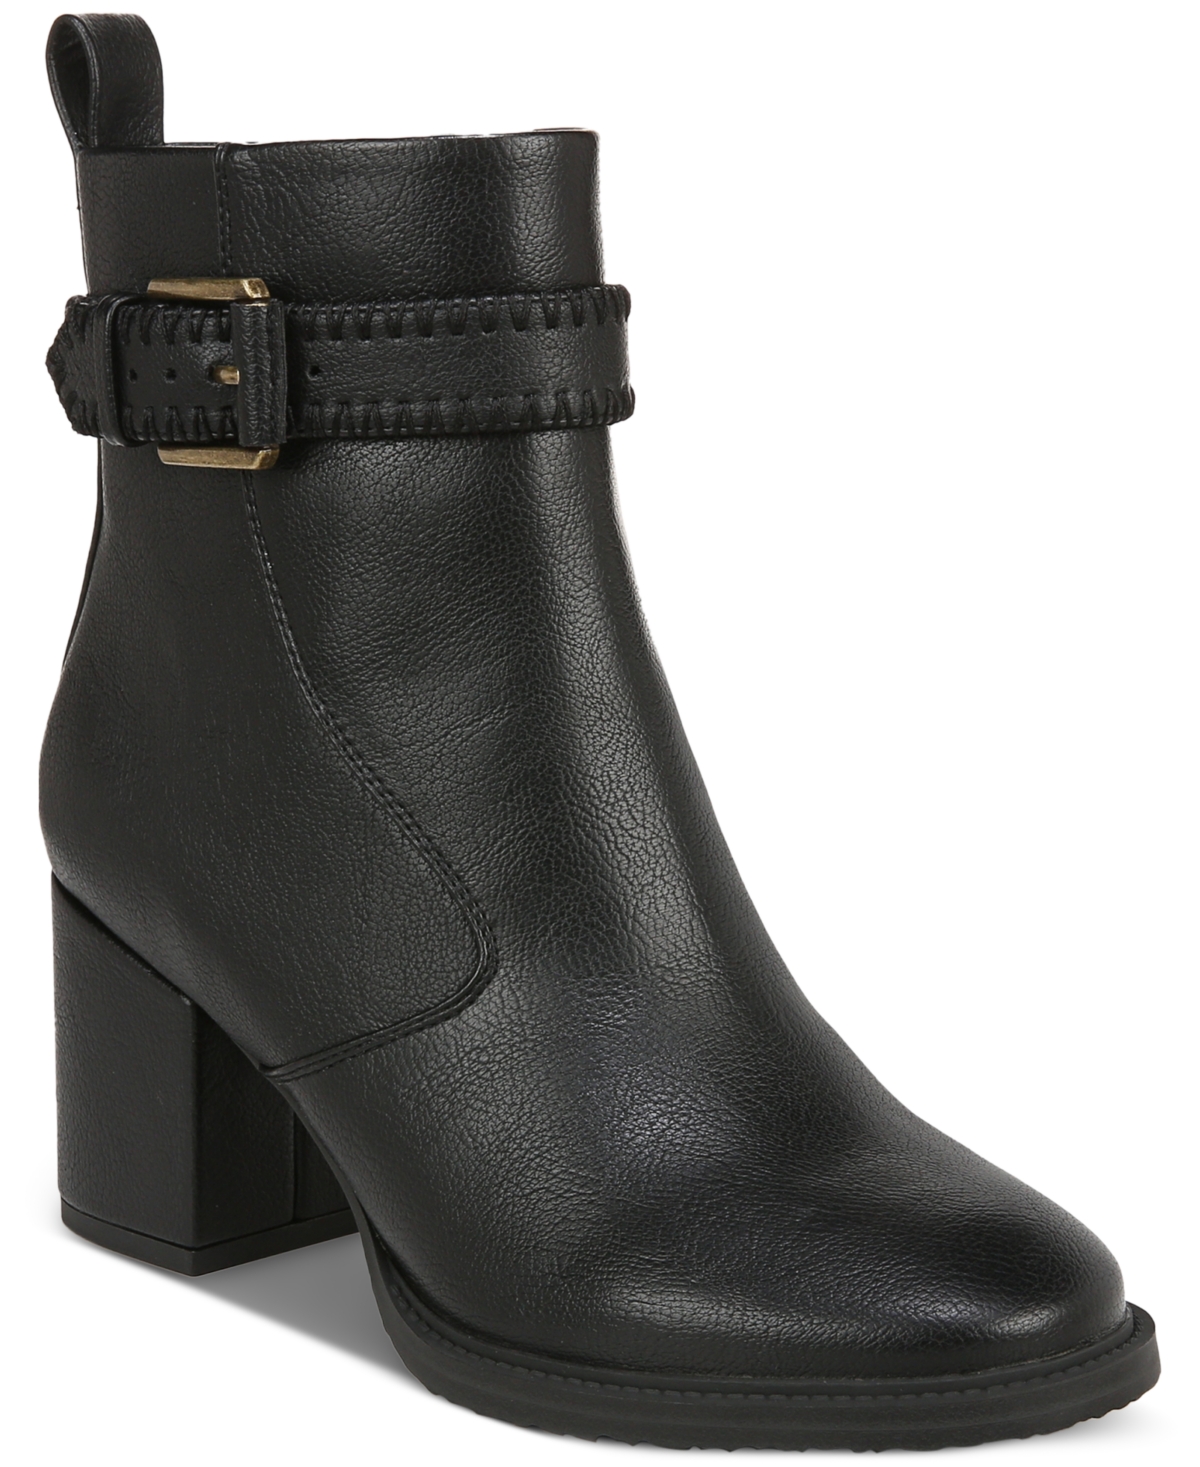 Women's Rexx Buckled Dress Booties - Black Leather